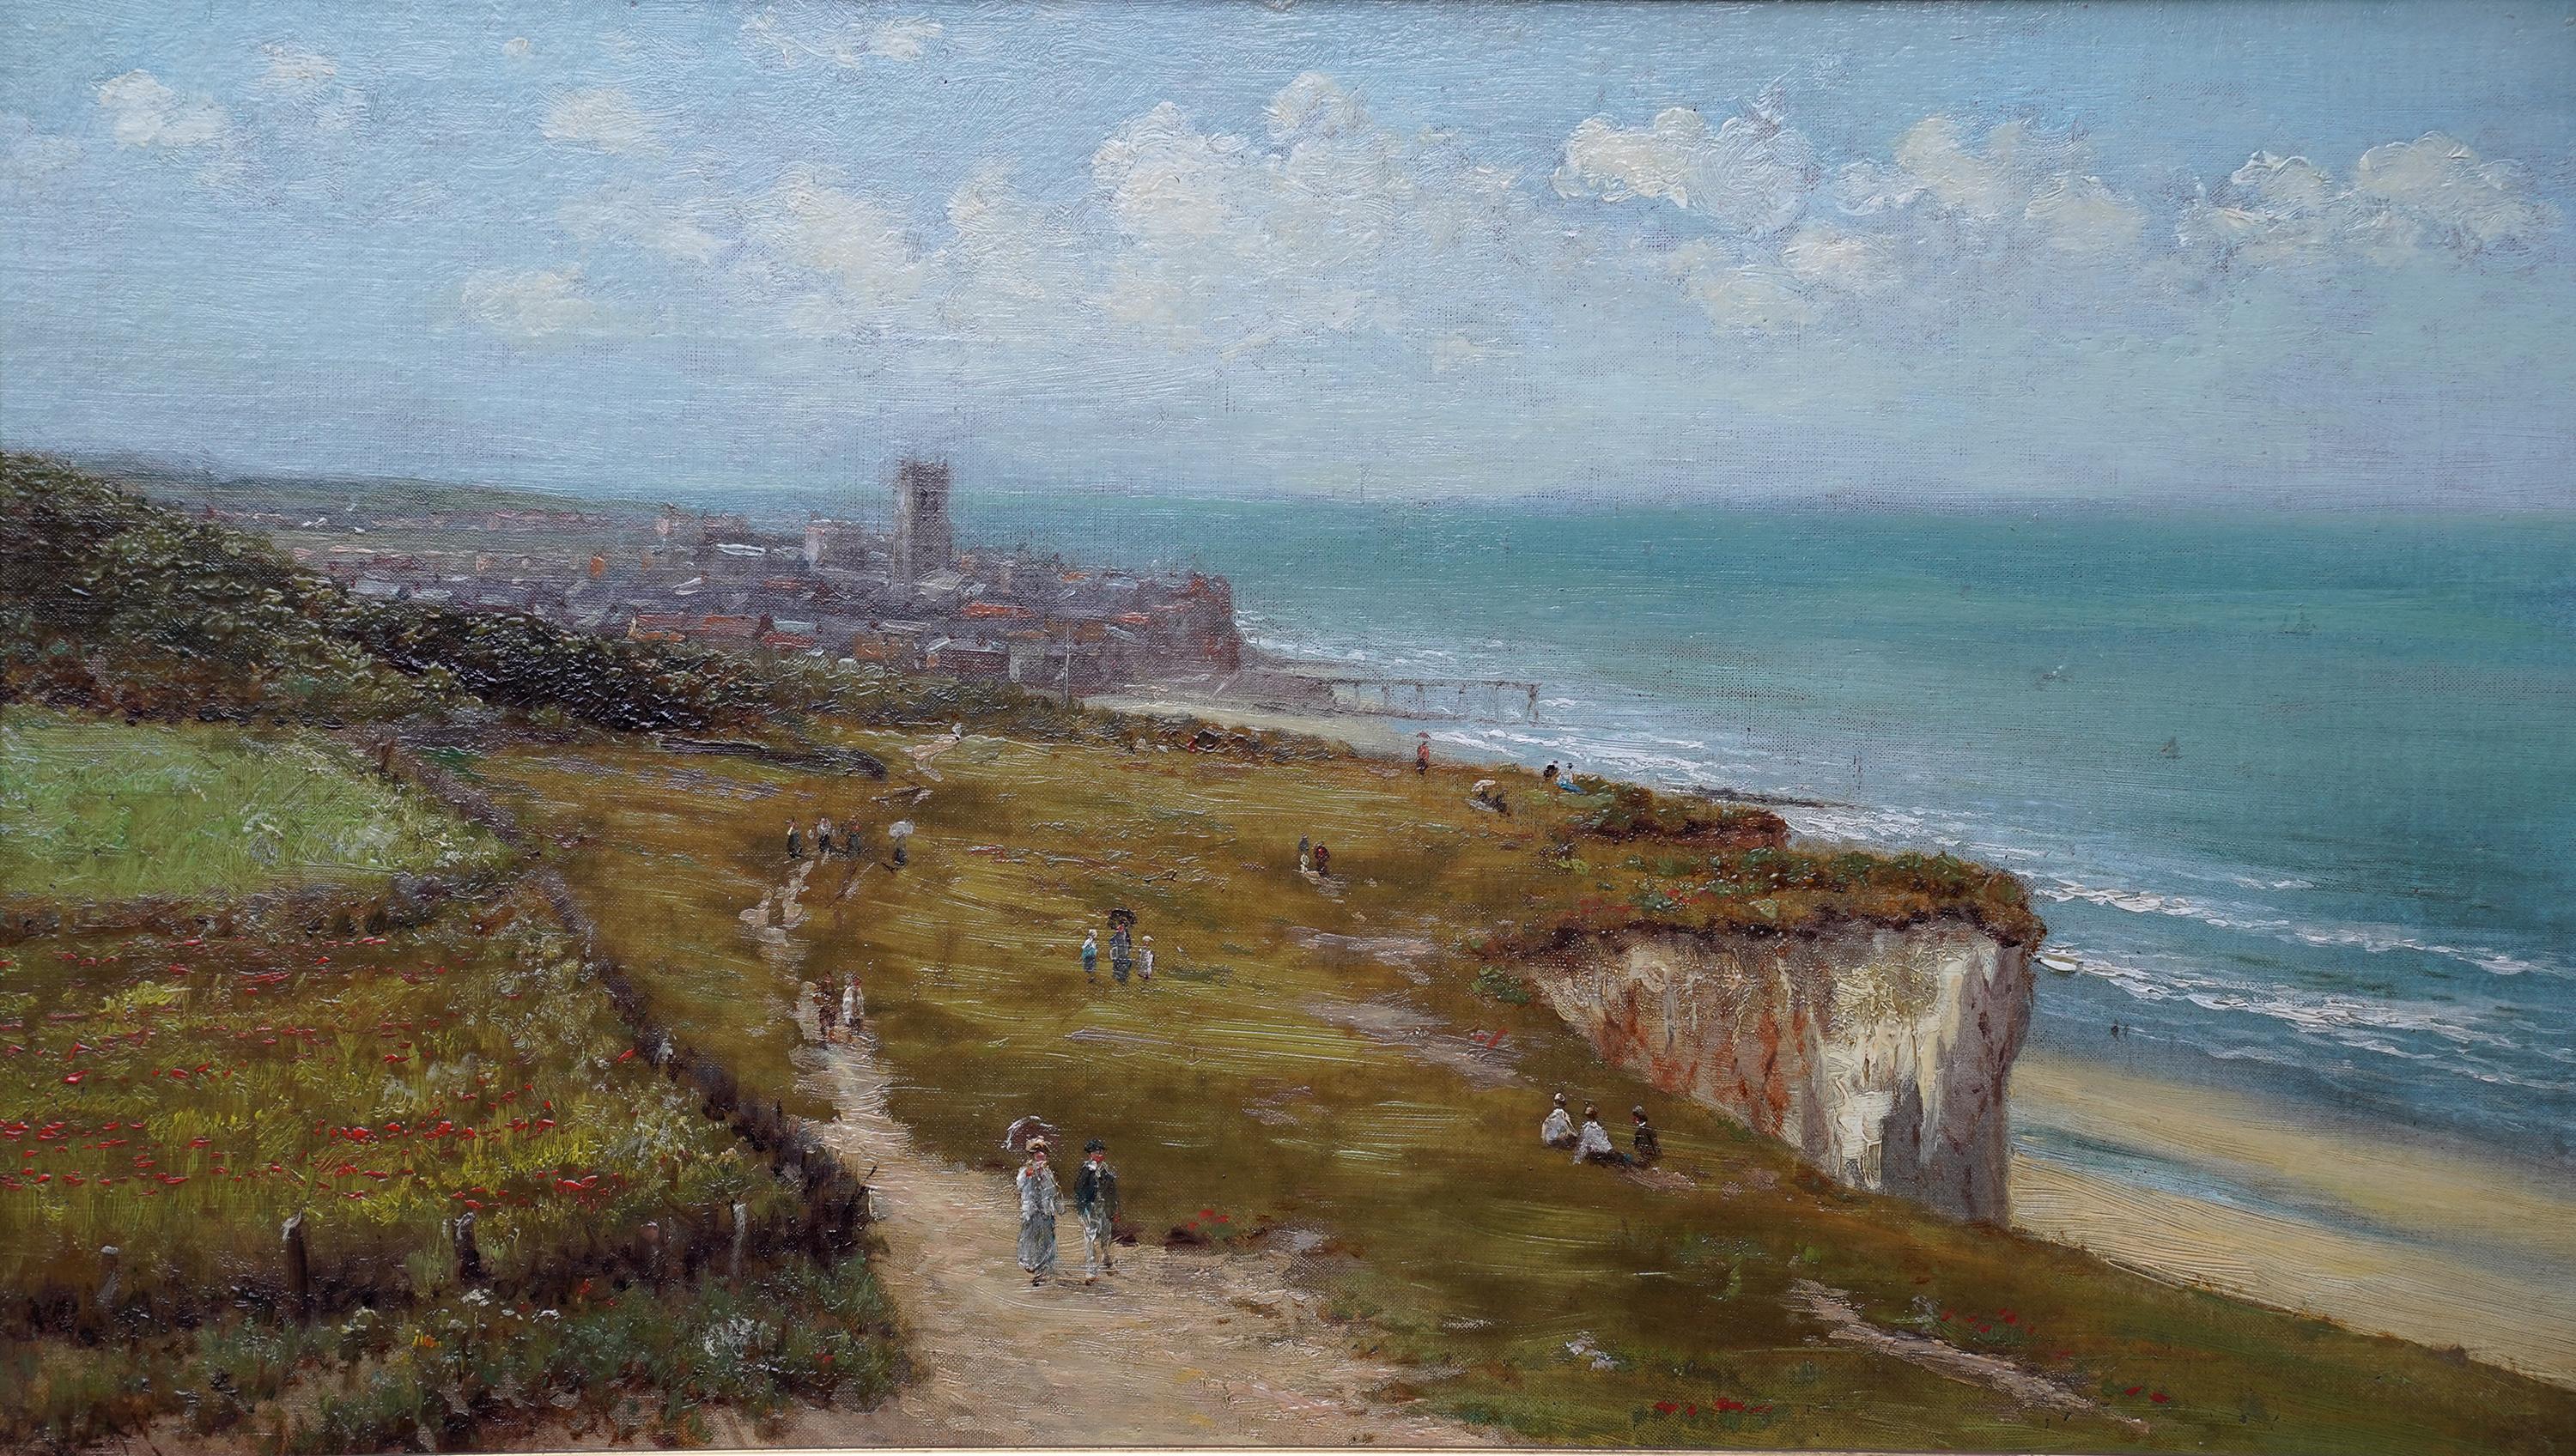 Cromer Coastal Landscape from Cliffs - British 19th century art oil painting - Painting by Robert Finlay Mcintyre